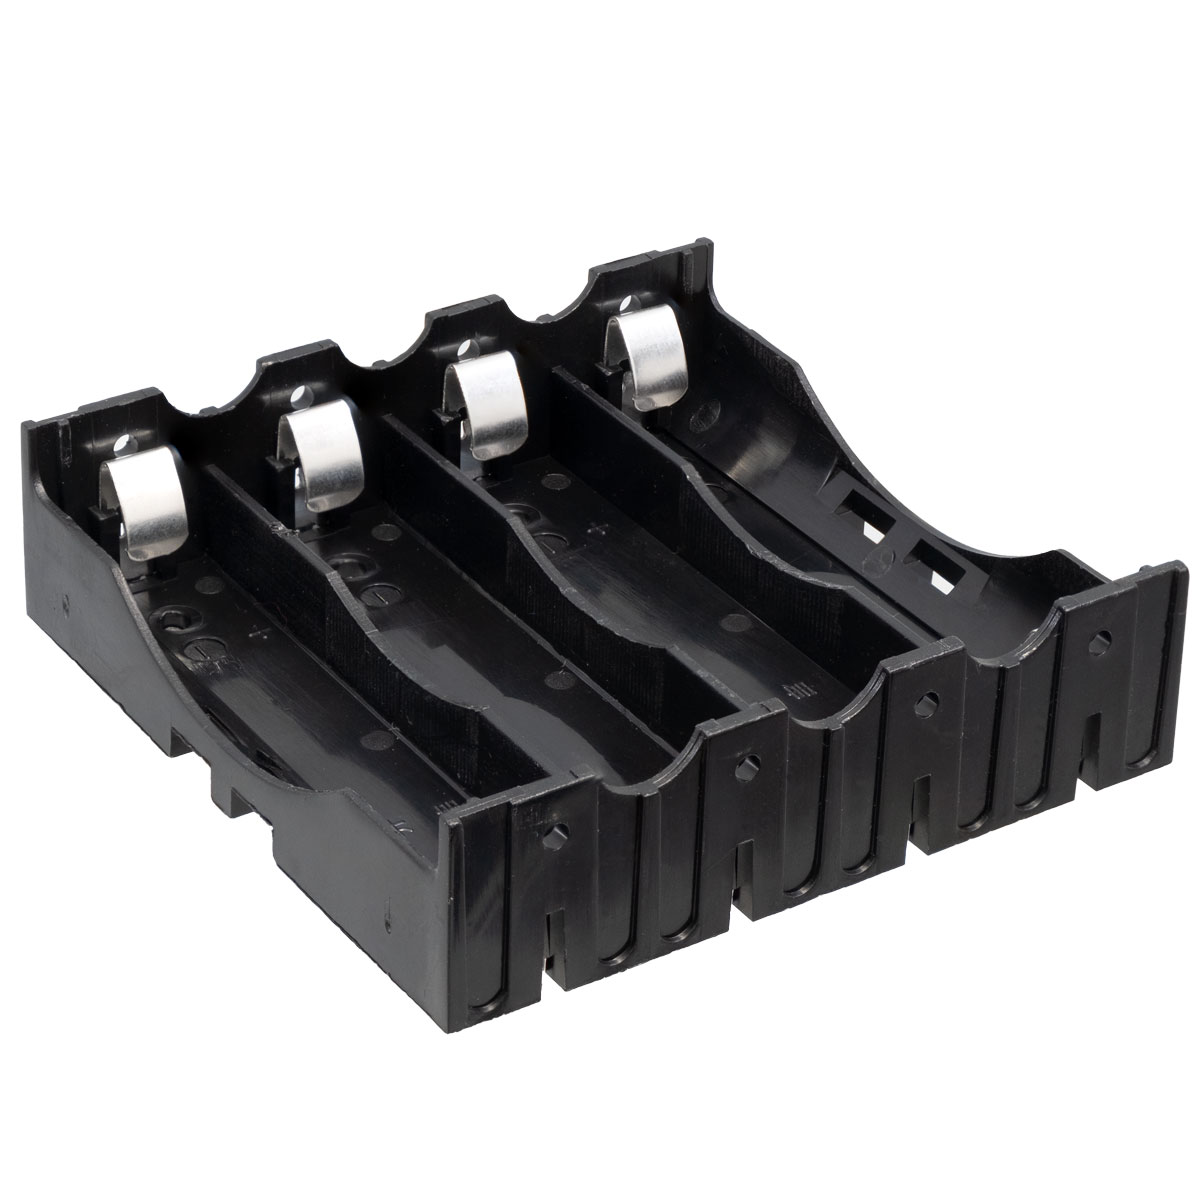 4 units battery holder for 18650 bateries, chasis model